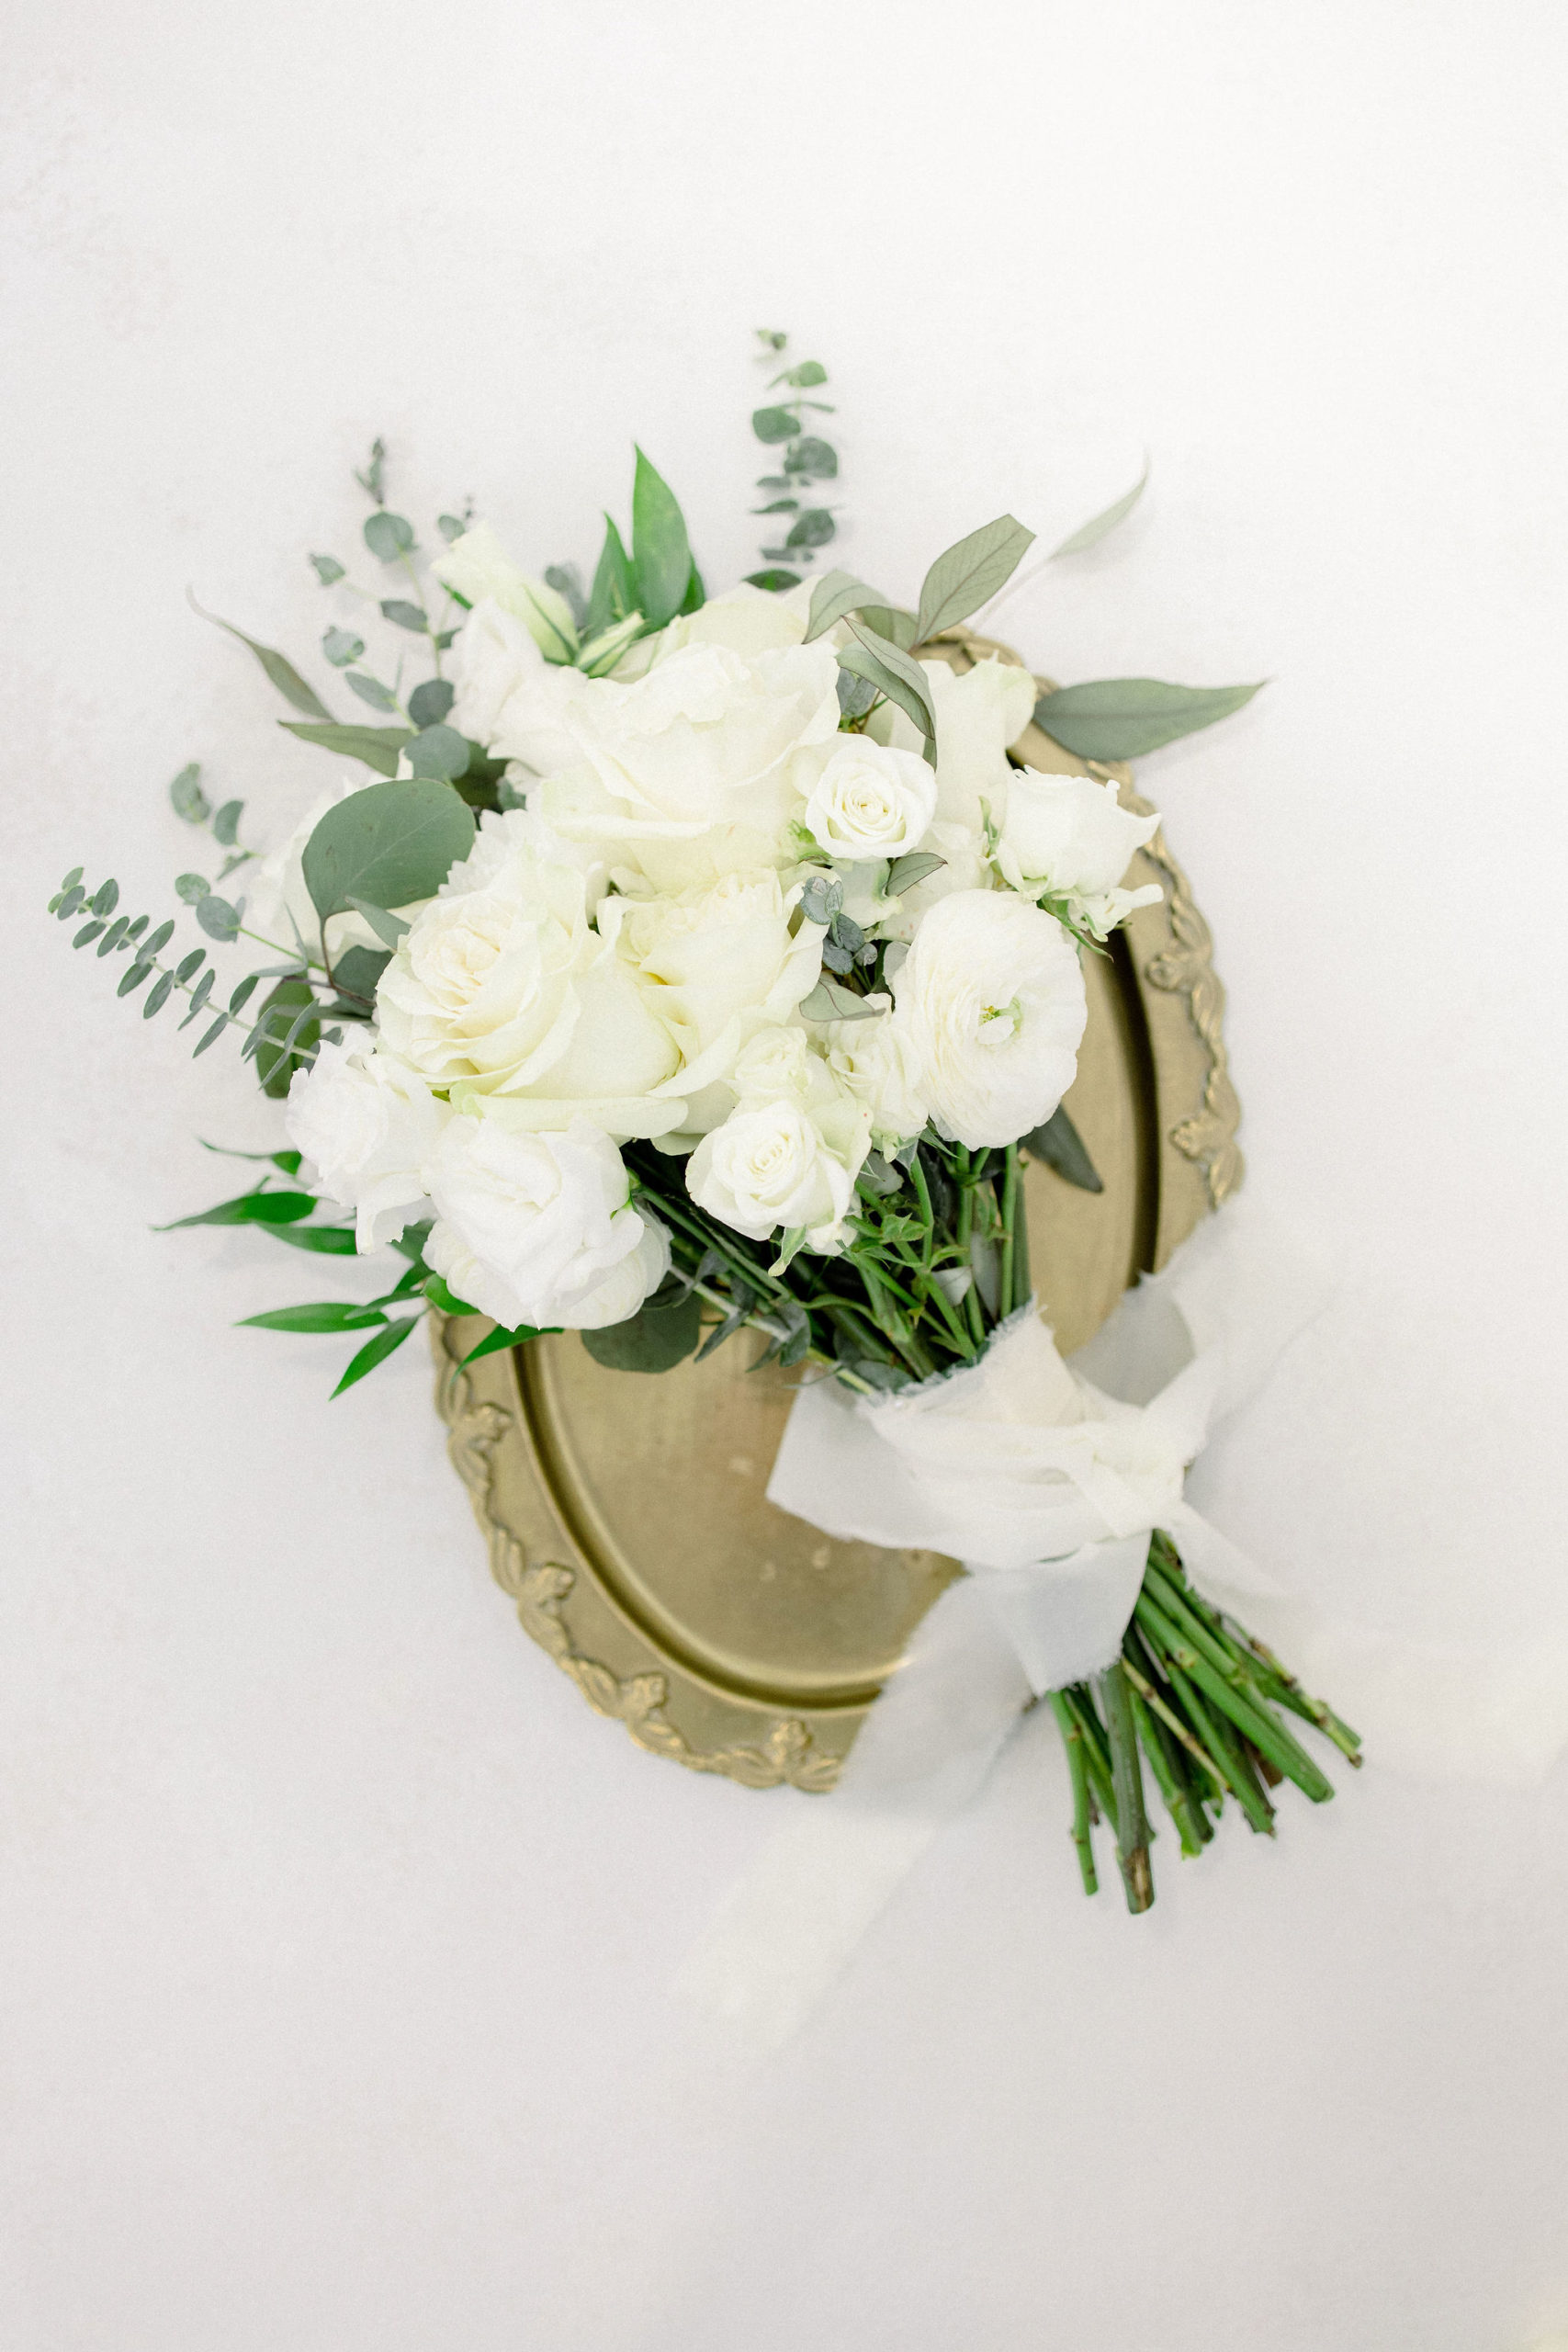 Wedding Photographer Jommy Photography captures a portrait of an all white and green bridal bouquet. White rose bouquet with silver dollar accents. Bridal bouquet flatlay portrait by Jommy Photography.
